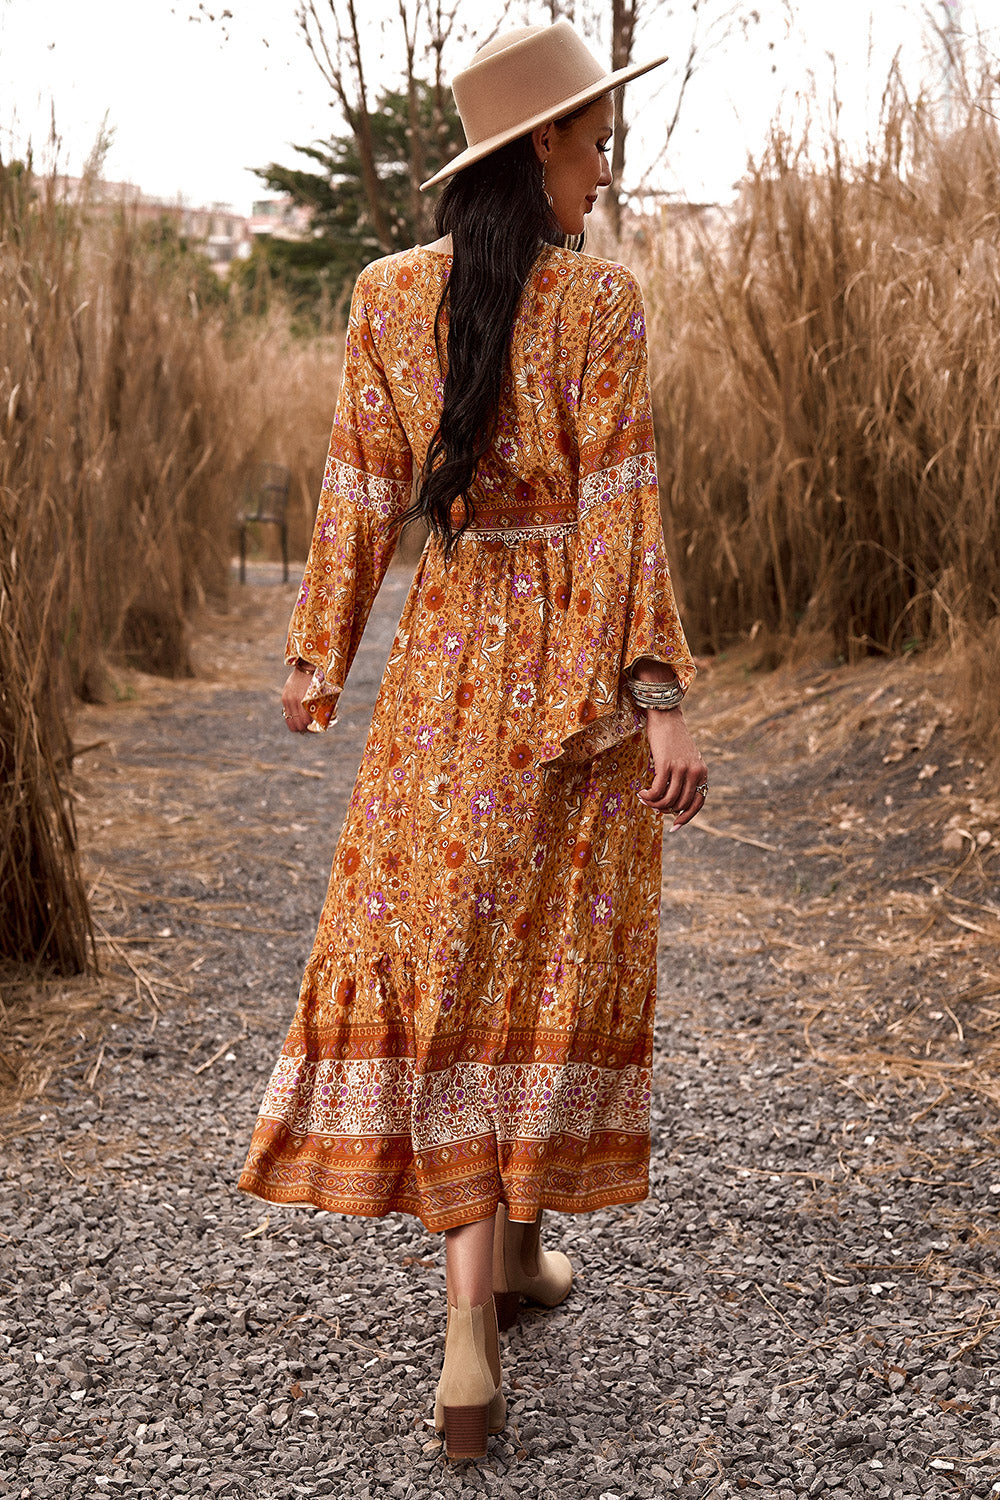 Elegant floral-patterned Boho Maxi Dress with long, flowy sleeves.